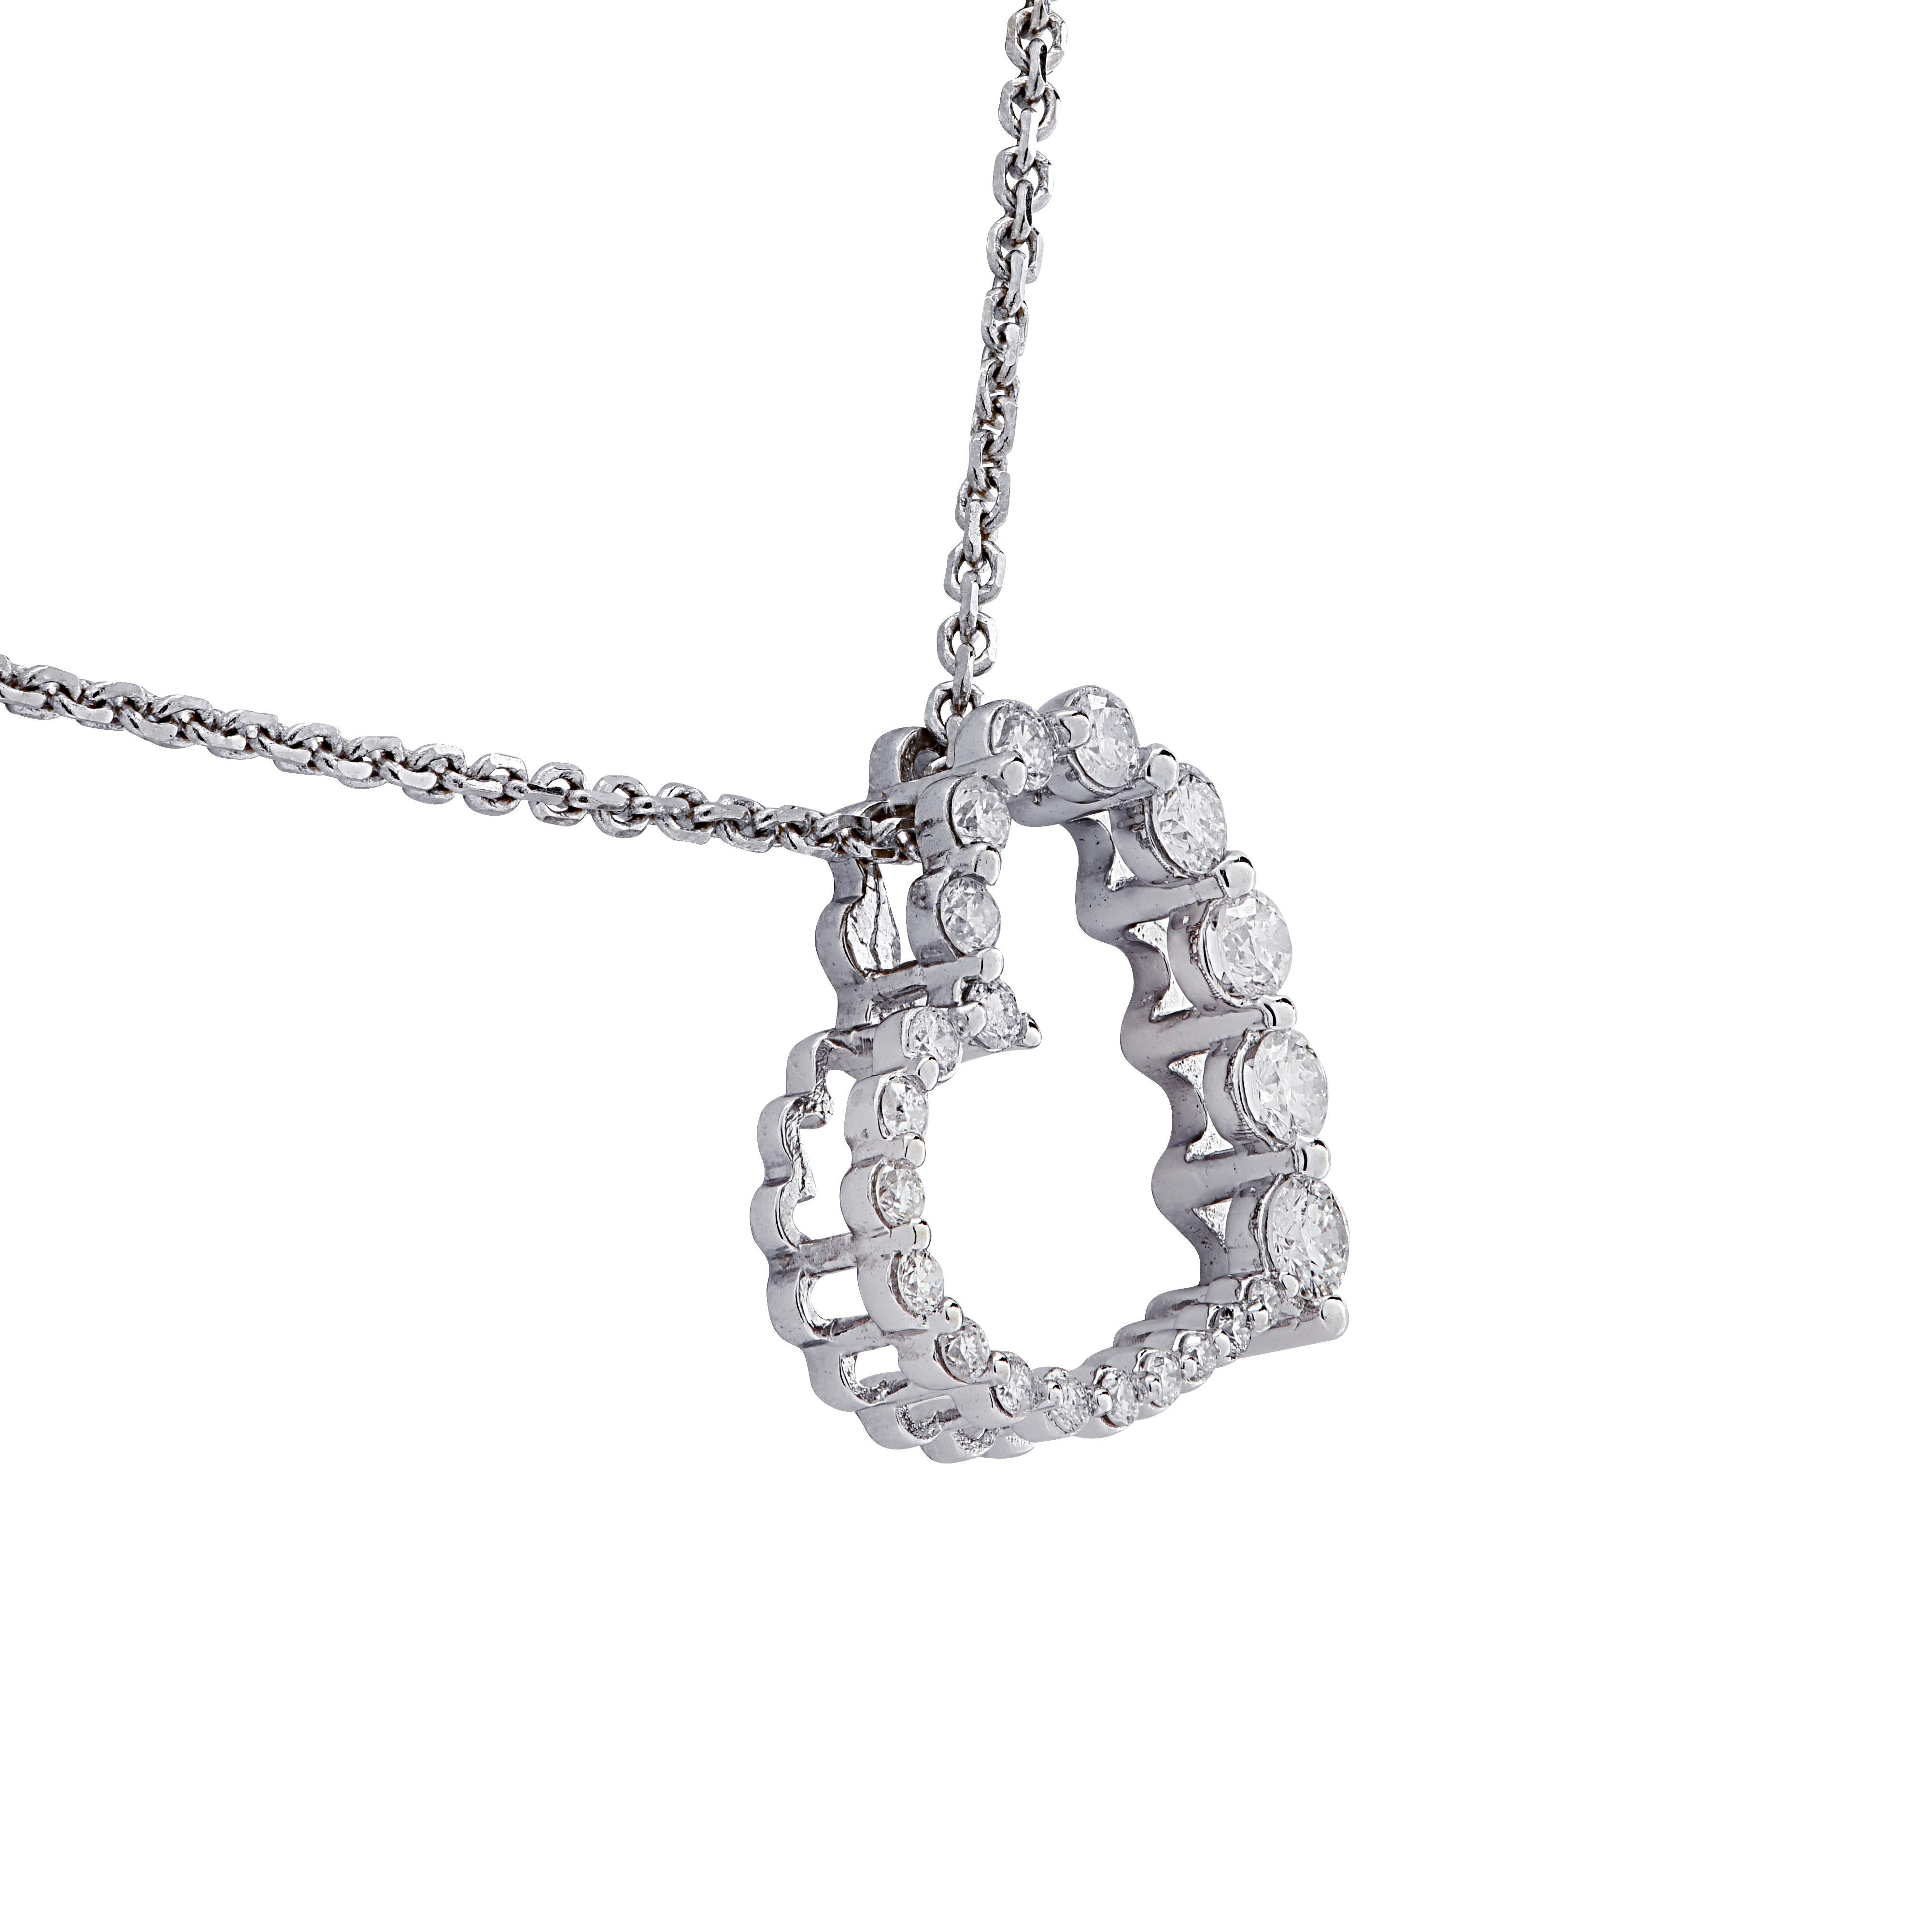 Enchanting open heart diamond pendant crafted in white gold, featuring 22 round brilliant cut diamonds, graduating in size, weighing approximately .40 carats total, G color, SI clarity. The pendant measures .5 of an inch in length and .6 of an inch